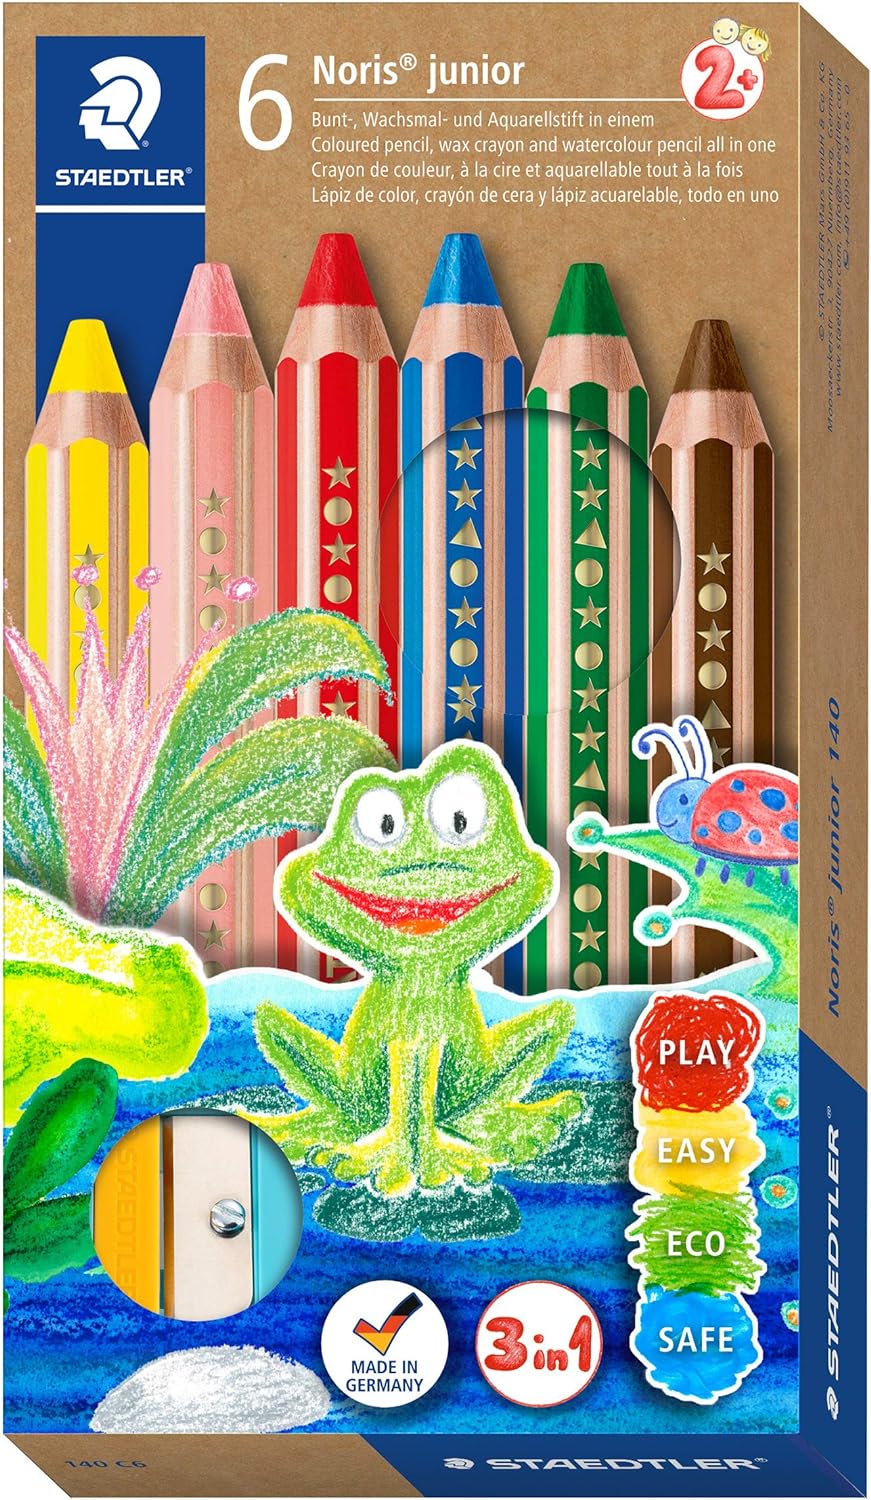 Large 3-in-1 Colouring Pencil 6 colours + sharpener, staedtler 140, upcycled wood, box front top view